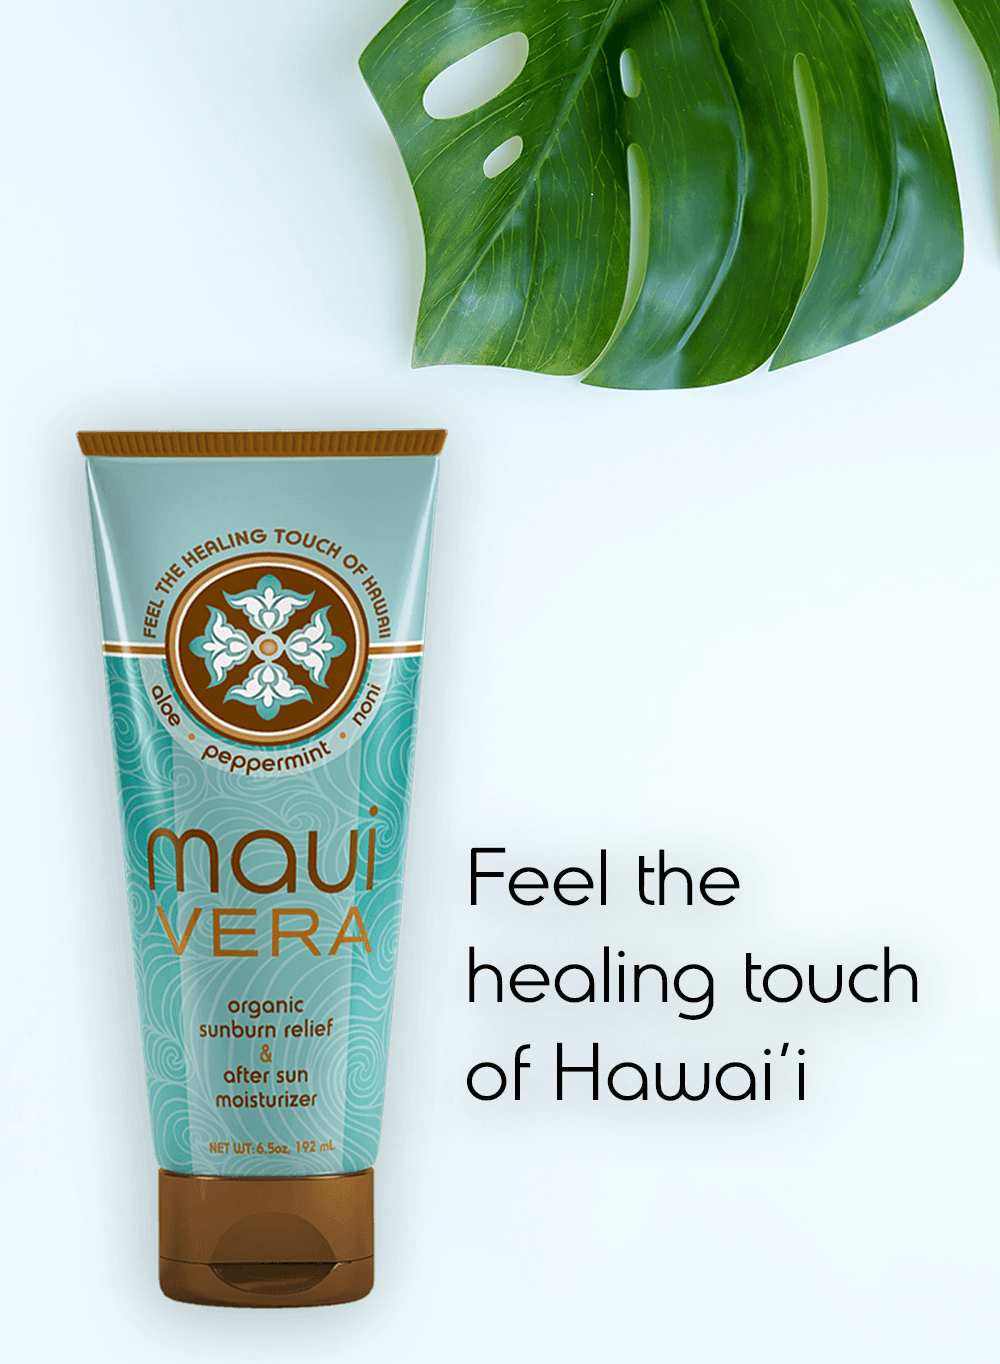 Maui Vera Collection of Natural Skin Care Products